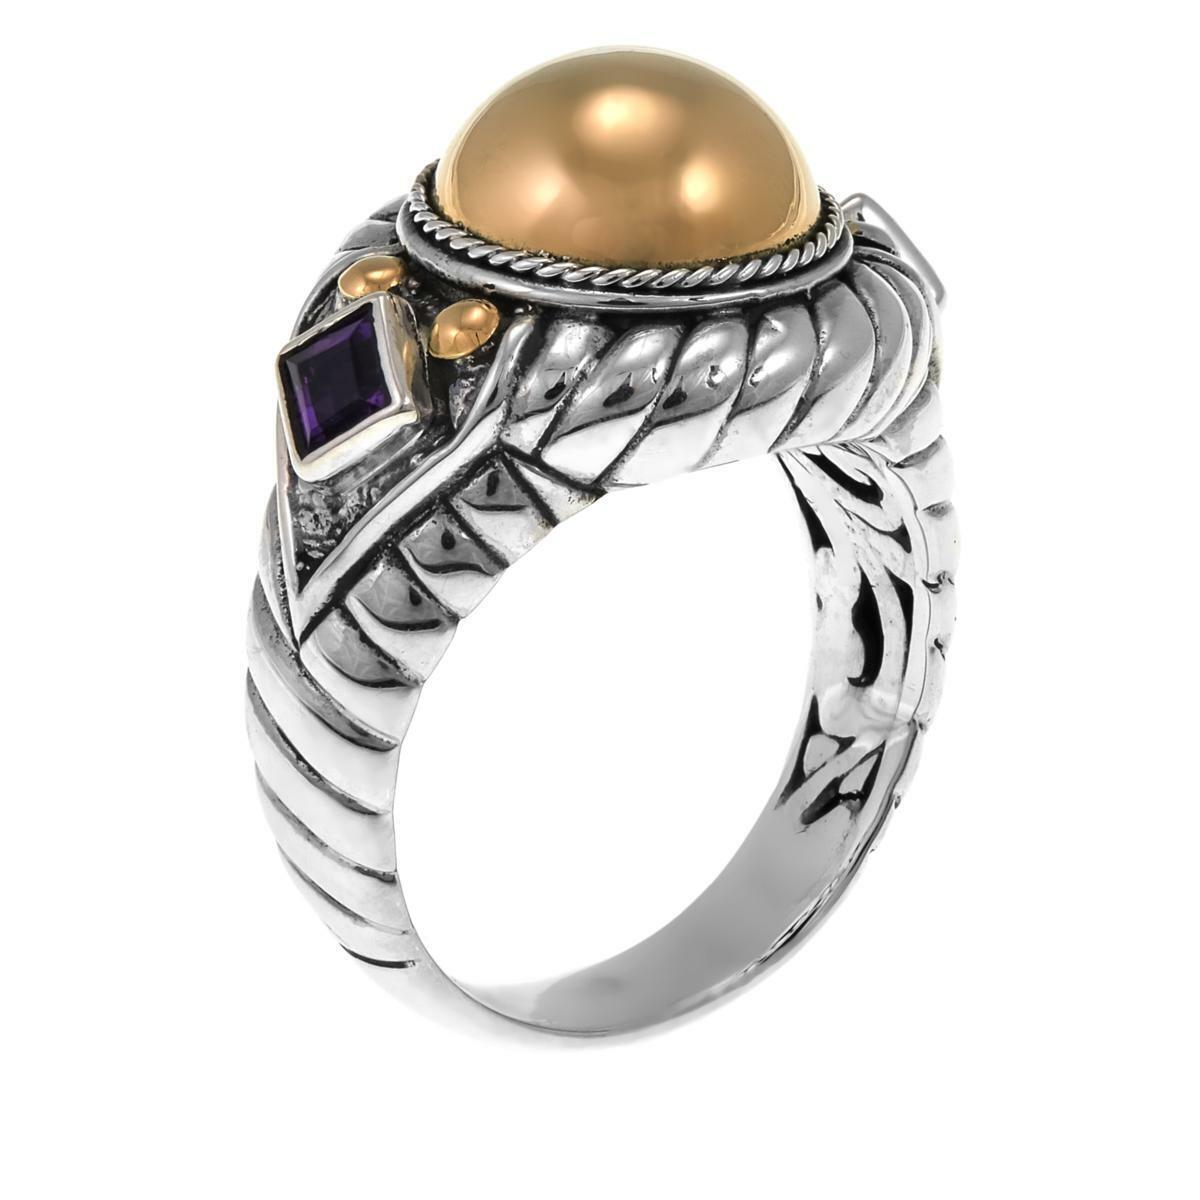 Bali Designs 2-Tone 0.22Ctw Amethyst Cable-Twist Ring Size 11 Hsn $221